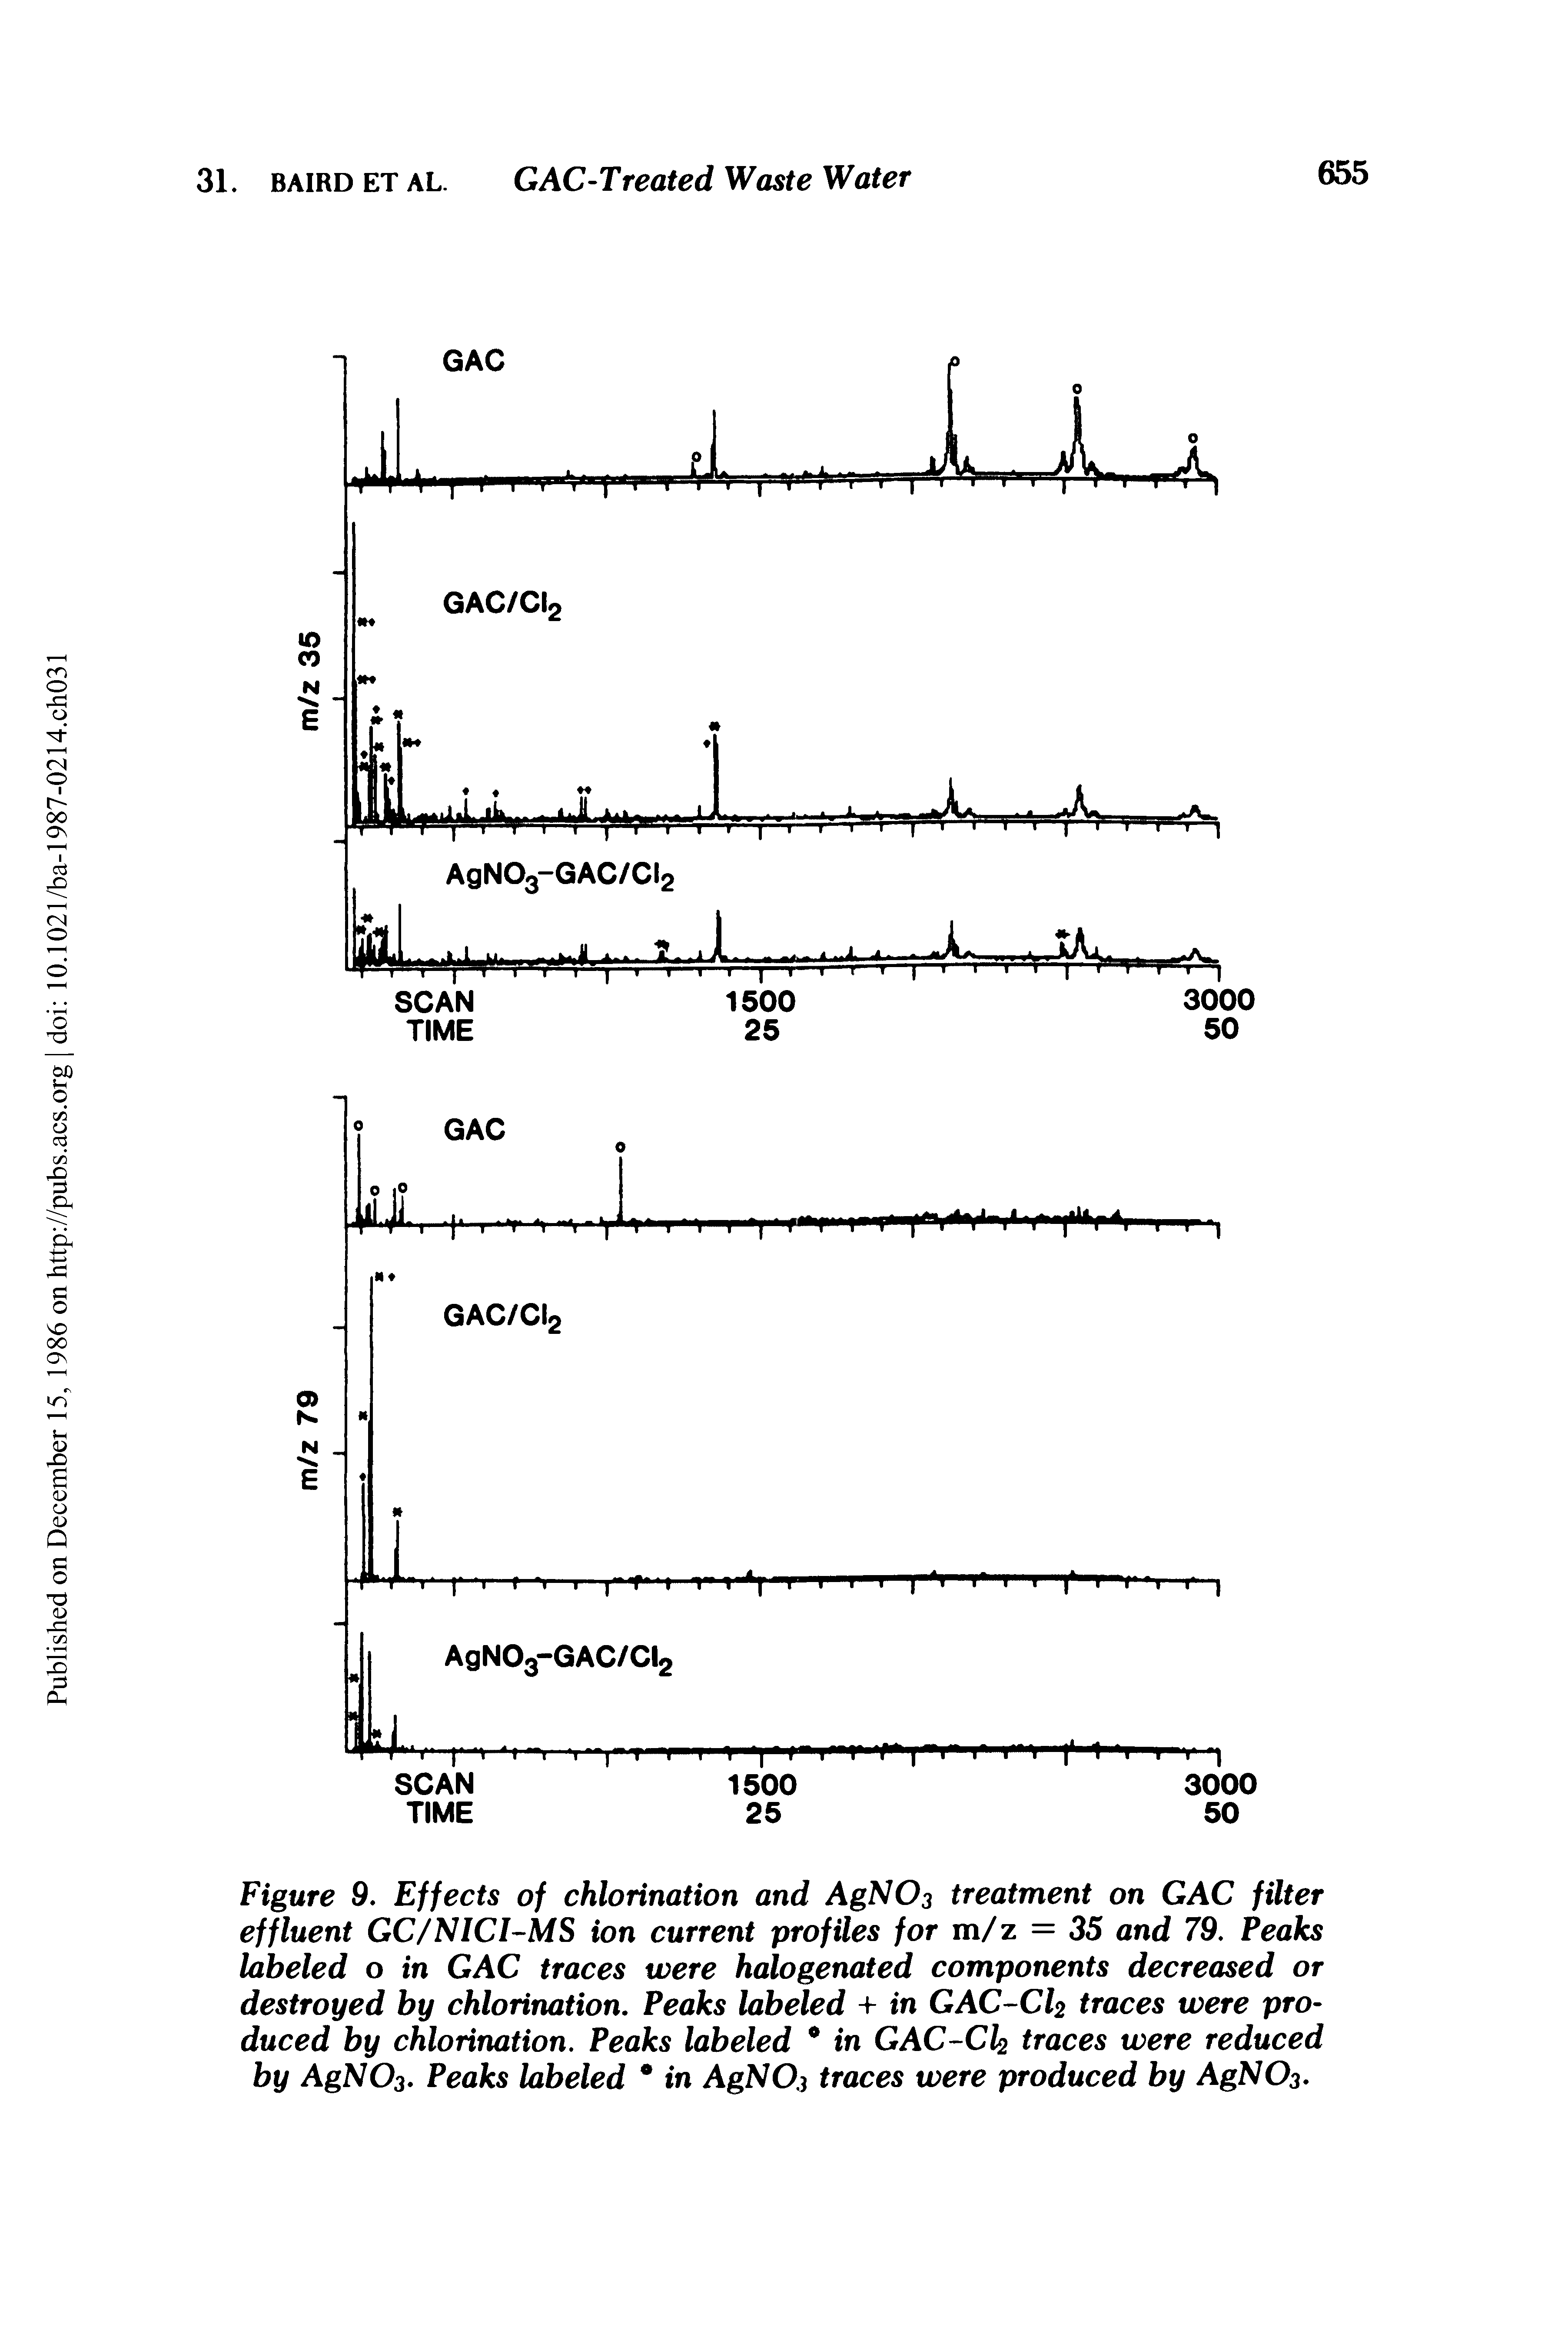 Figure 9. Effects of chlorination and AgN03 treatment on GAC filter effluent GC/NICI-MS ion current profiles for m/z = 35 and 79. Peaks labeled o in GAC traces were halogenated components decreased or destroyed by chlorination. Peaks labeled + in GAC-Ch traces were produced by chlorination. Peaks labeled 0 in GAC-Cfe traces were reduced by AgNQ3. Peaks labeled 0 in AgNQ3 traces were produced by AgNQ3.